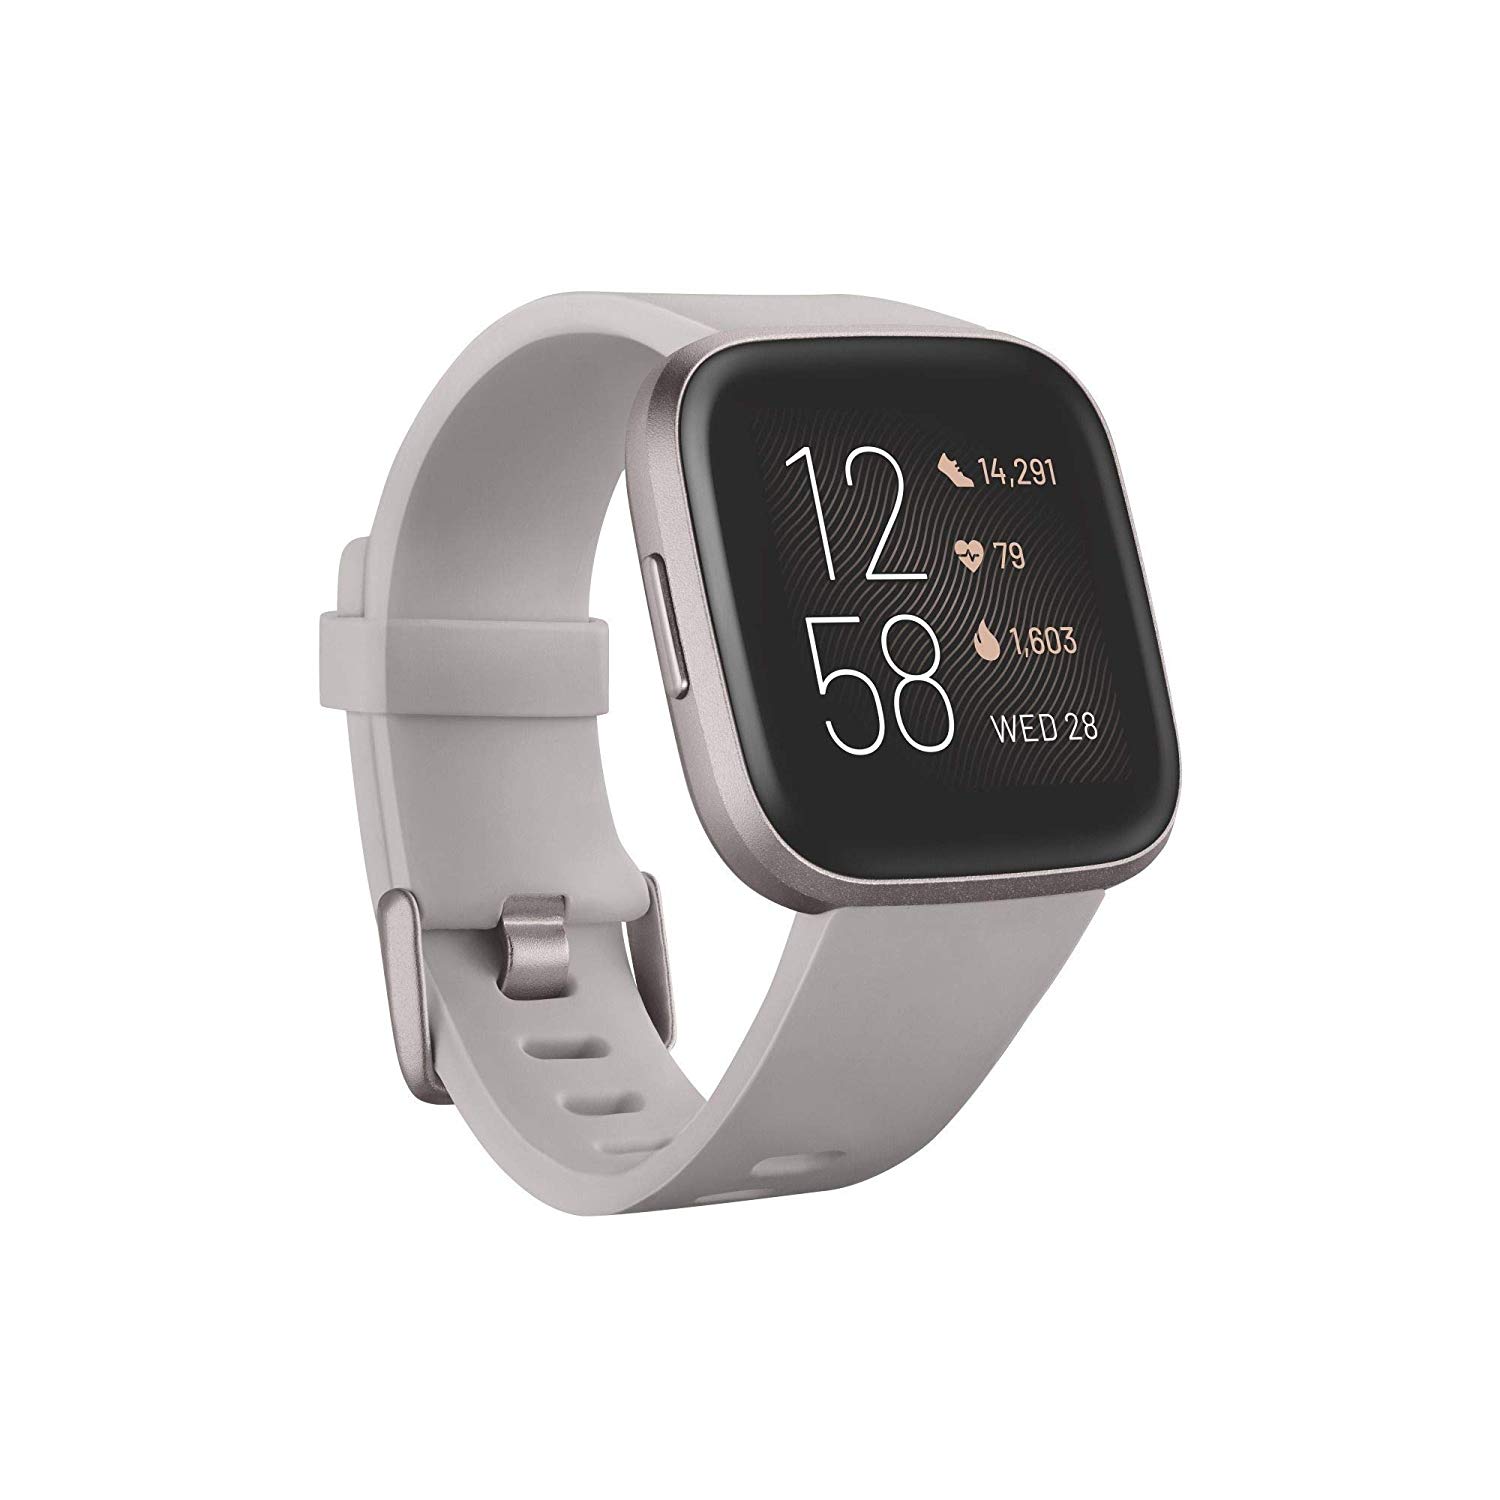 Fitbit Versa 2 Full Specifications and 